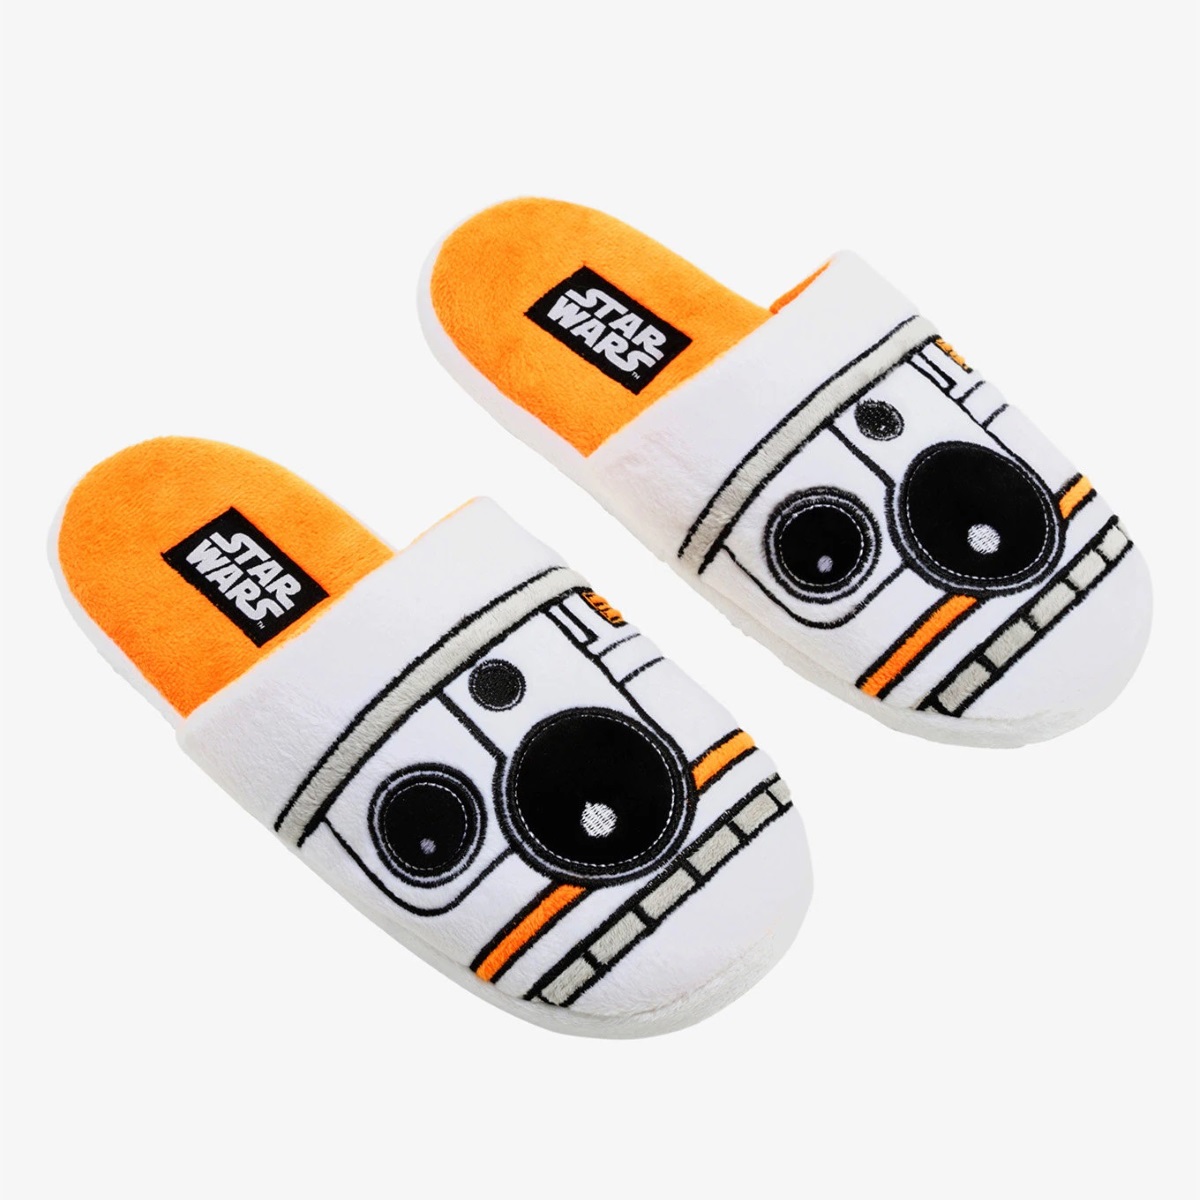 Star Wars BB-8 Slippers at Box Lunch